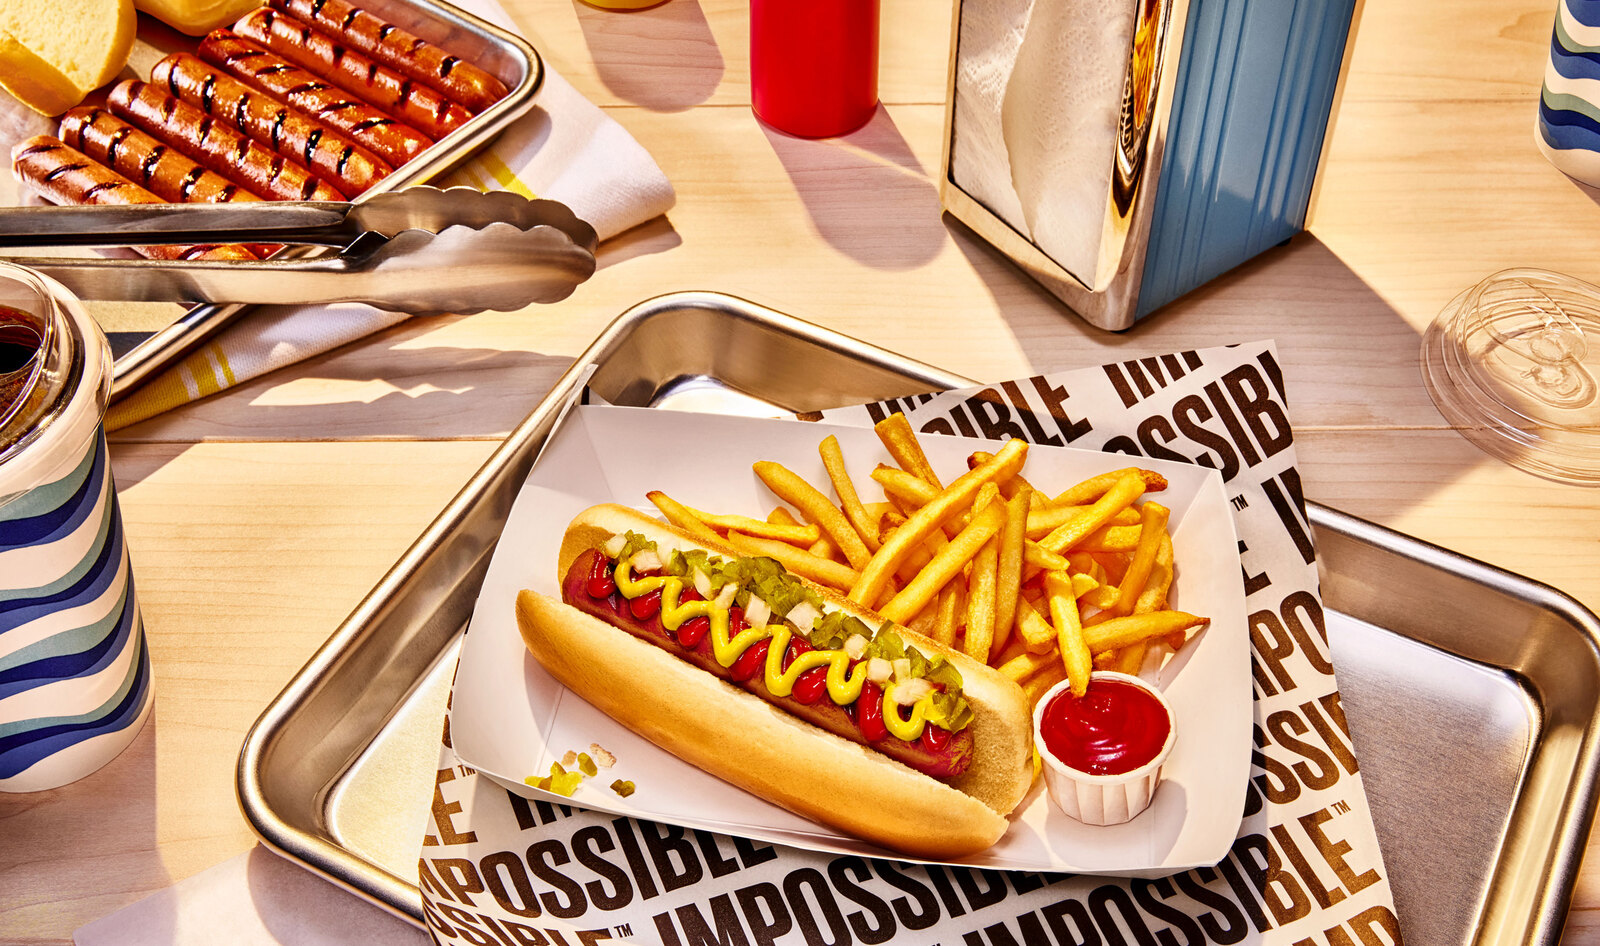 Impossible Hot Dogs Have Arrived, and New Research Says They’re a Heart-Healthy Swap for Meat